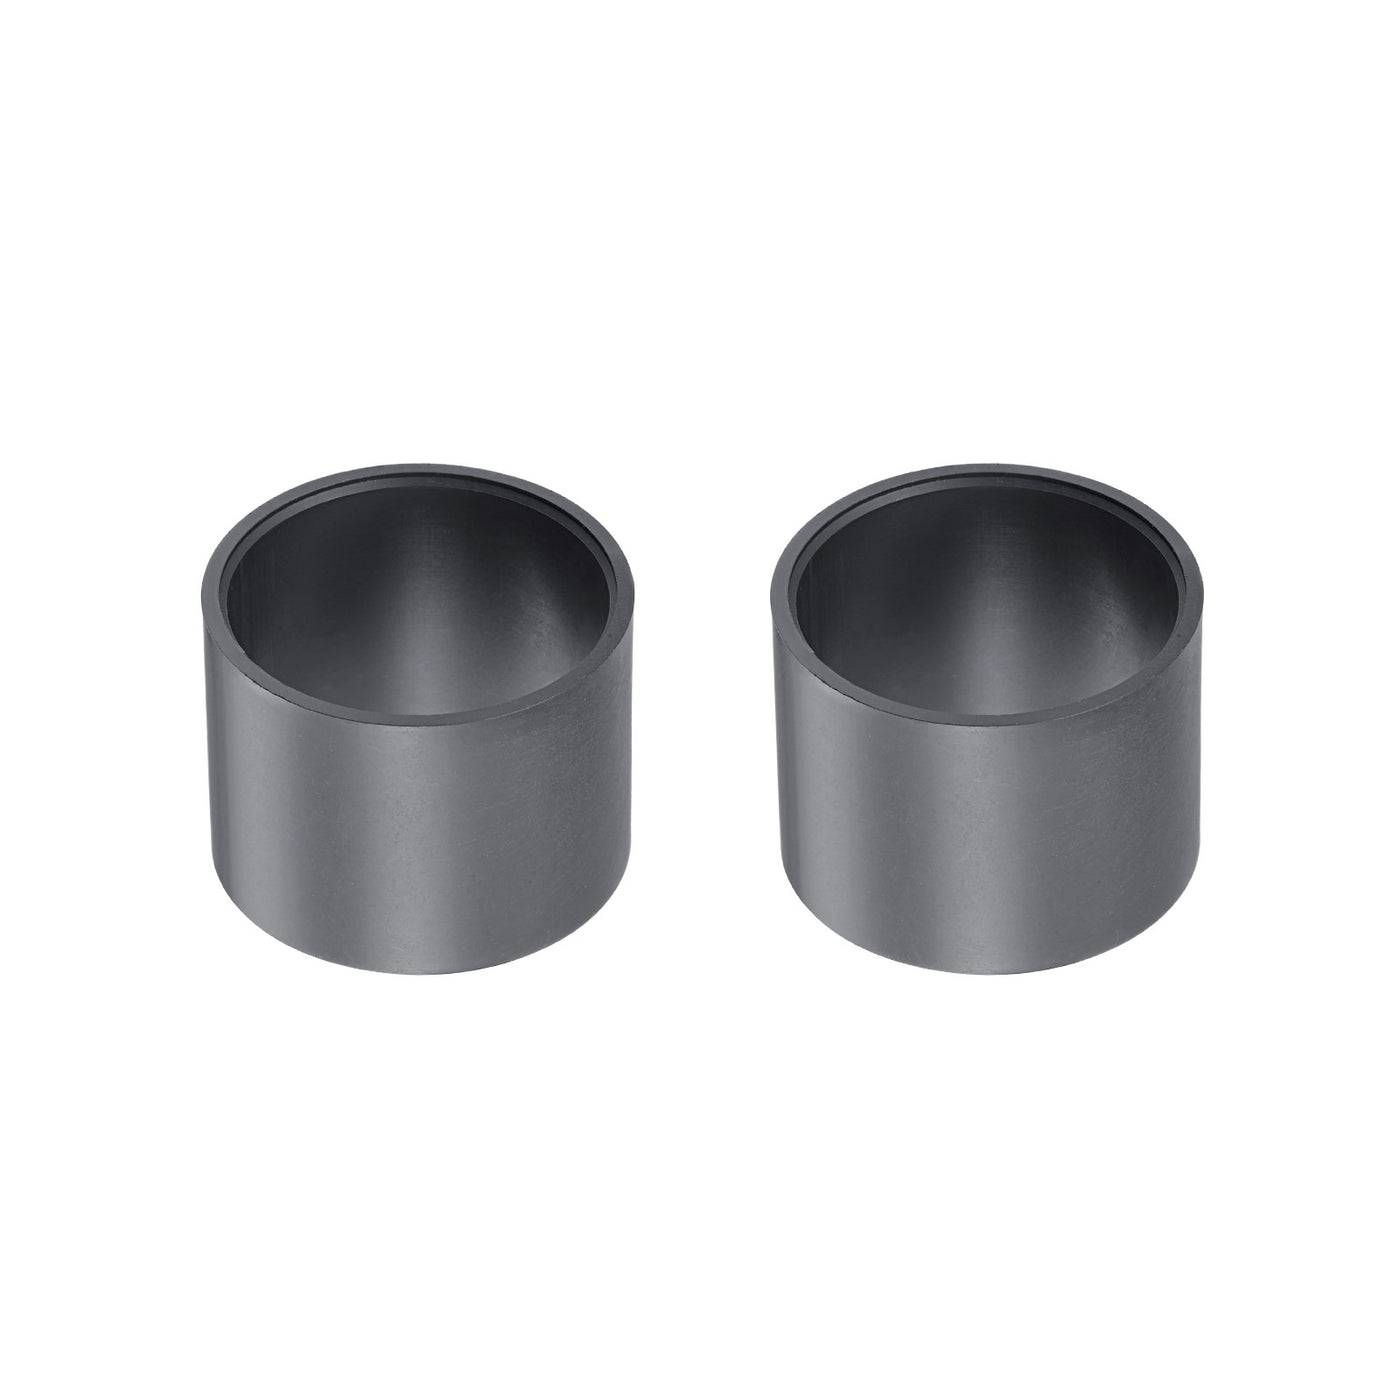 uxcell Uxcell Sleeve Bearings 30mmx34mmx26mm POM Wrapped Oilless Bushings Black 2pcs